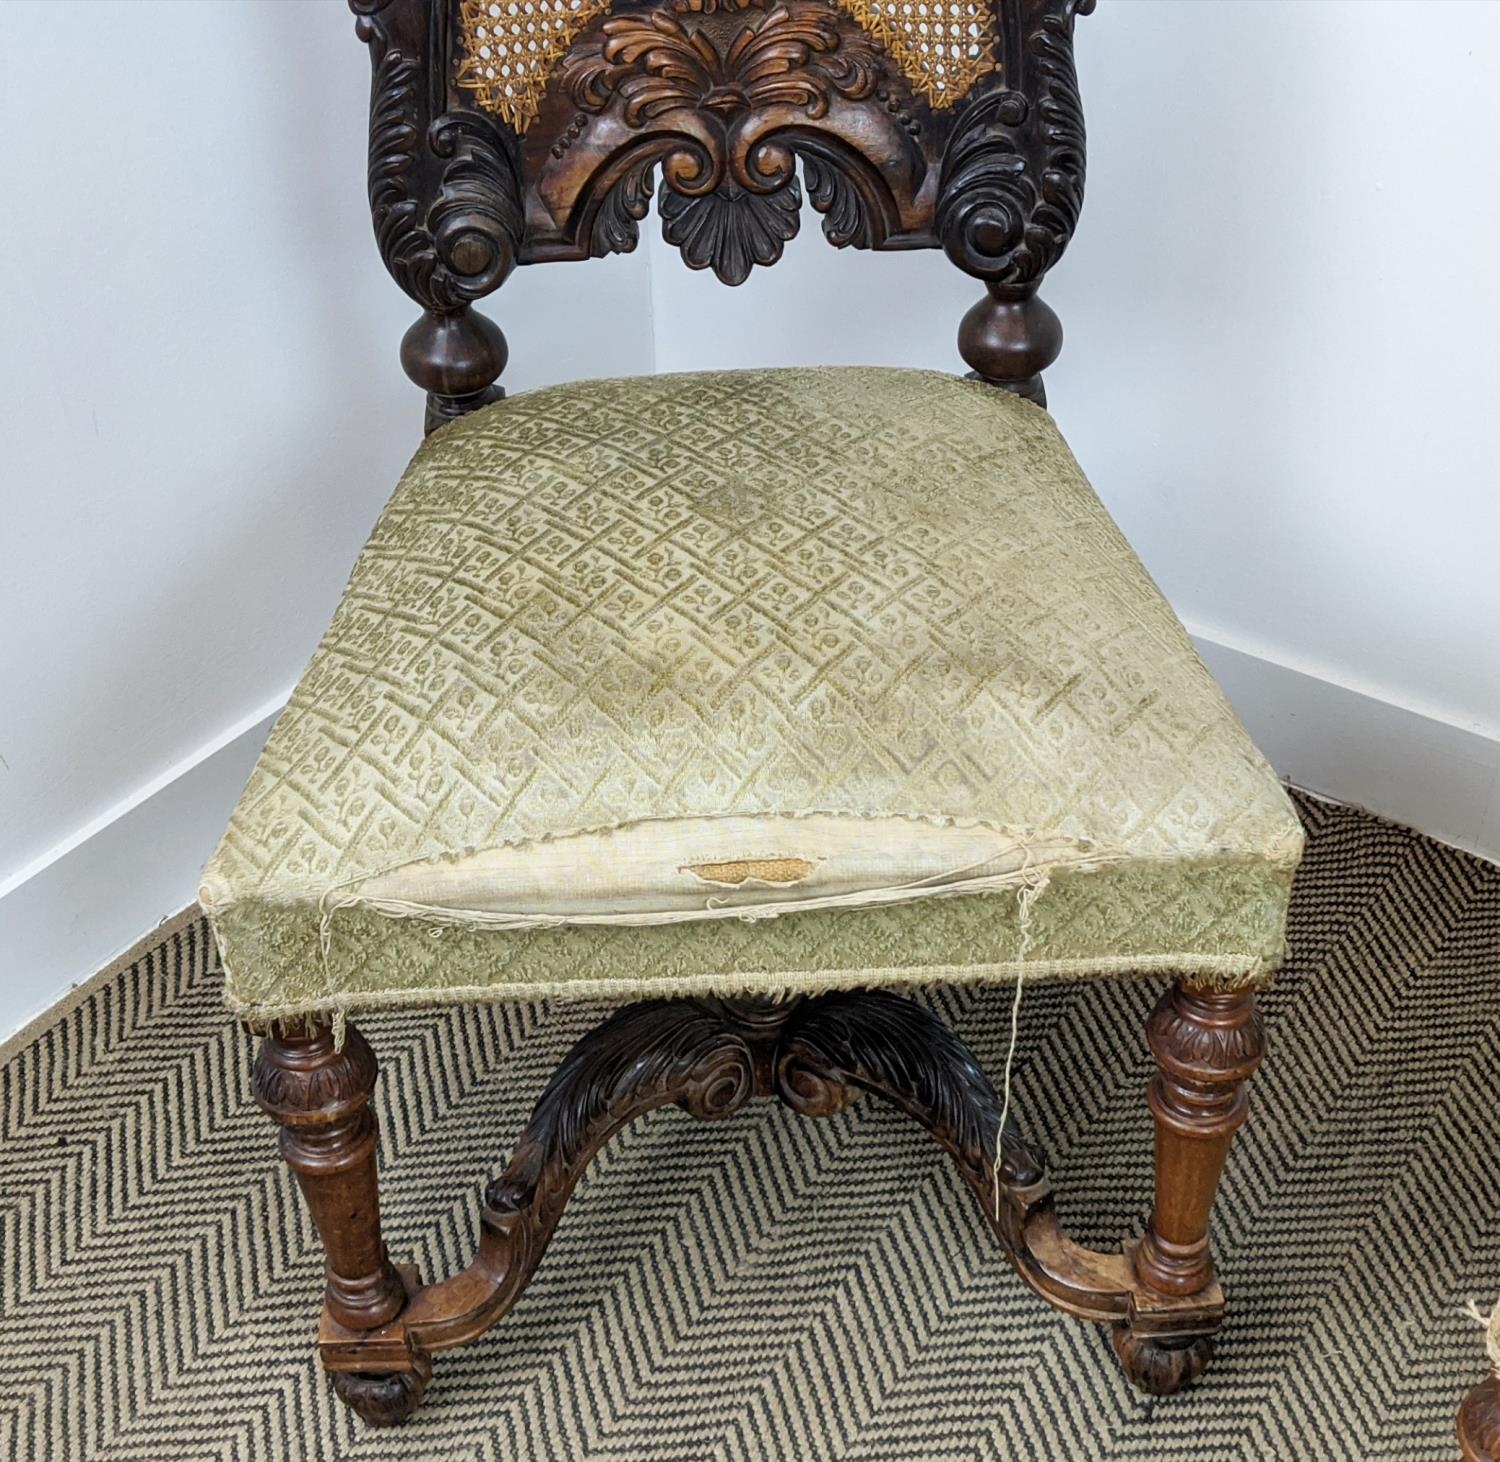 SIDE CHAIRS, a pair, 19th century Dutch with carved showframes with caned back panels and - Image 4 of 10